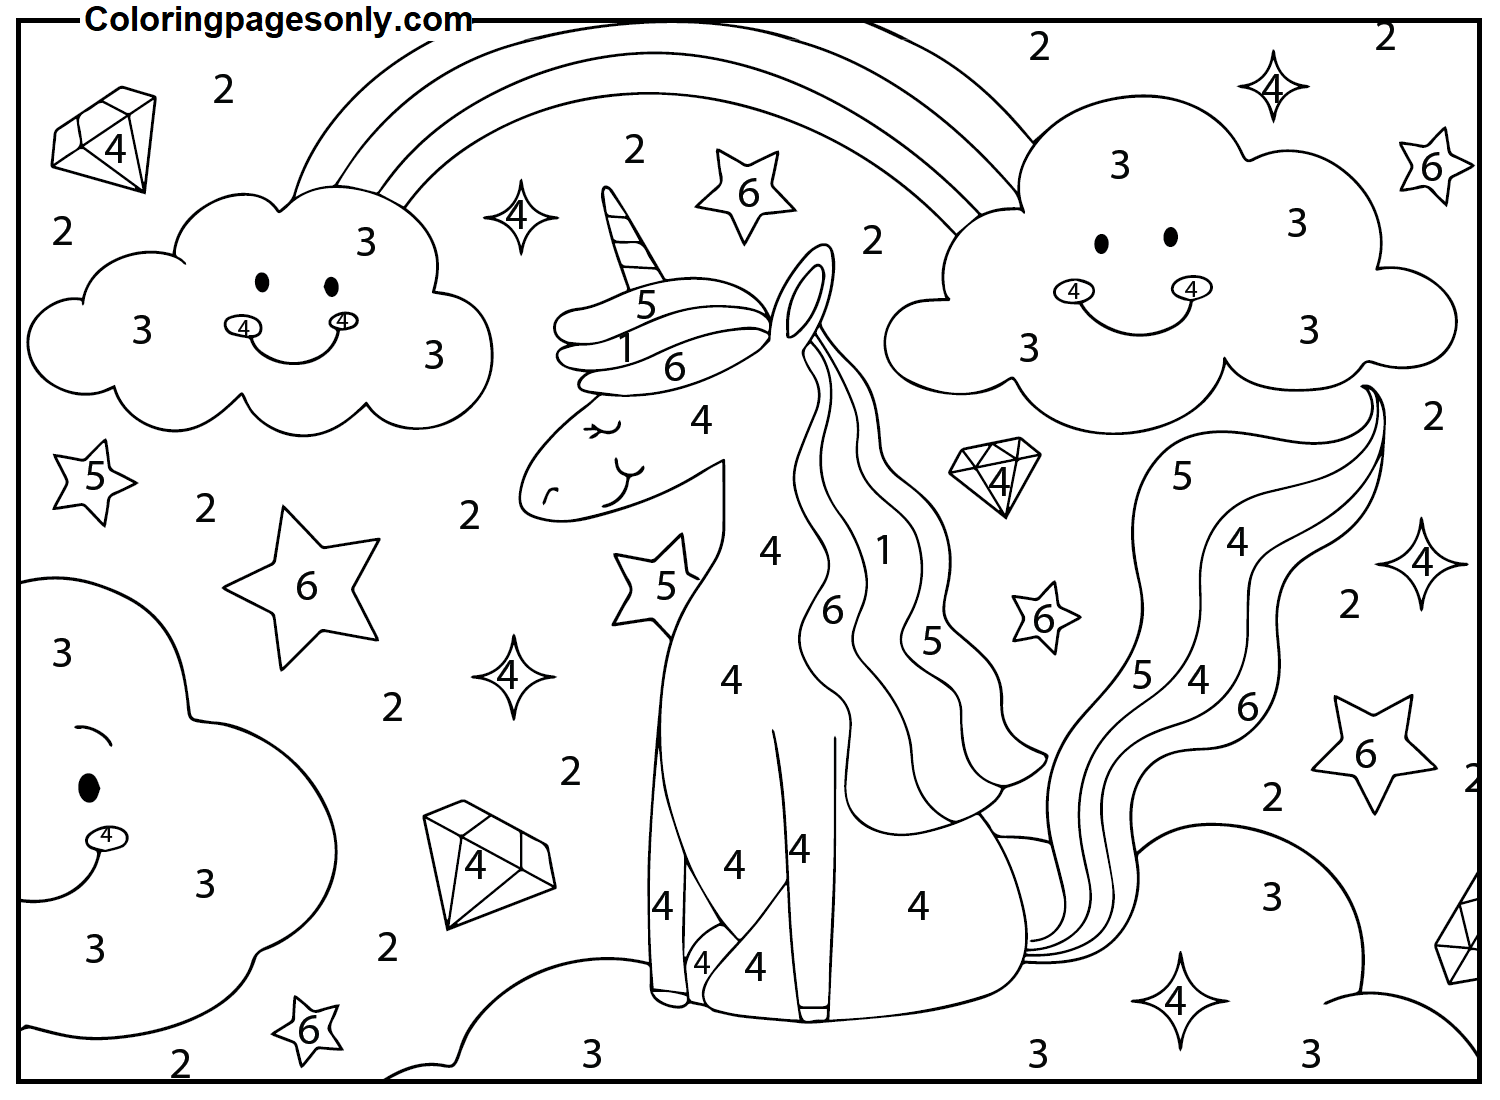 Unicorn color by number easy coloring page